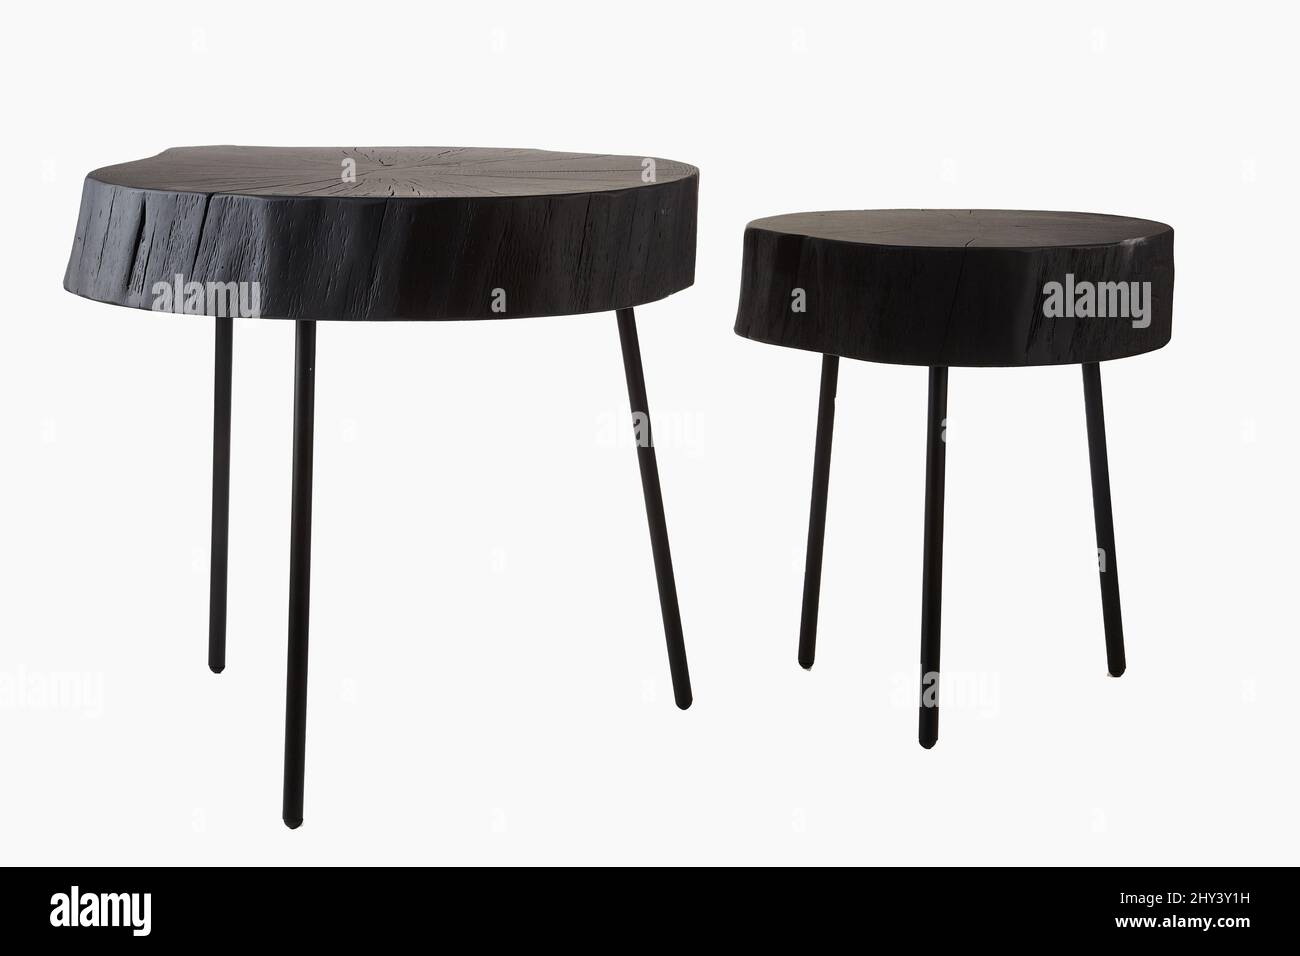 Shot of two black three legged stools made of wood trunk and steel isolated on a white background Stock Photo